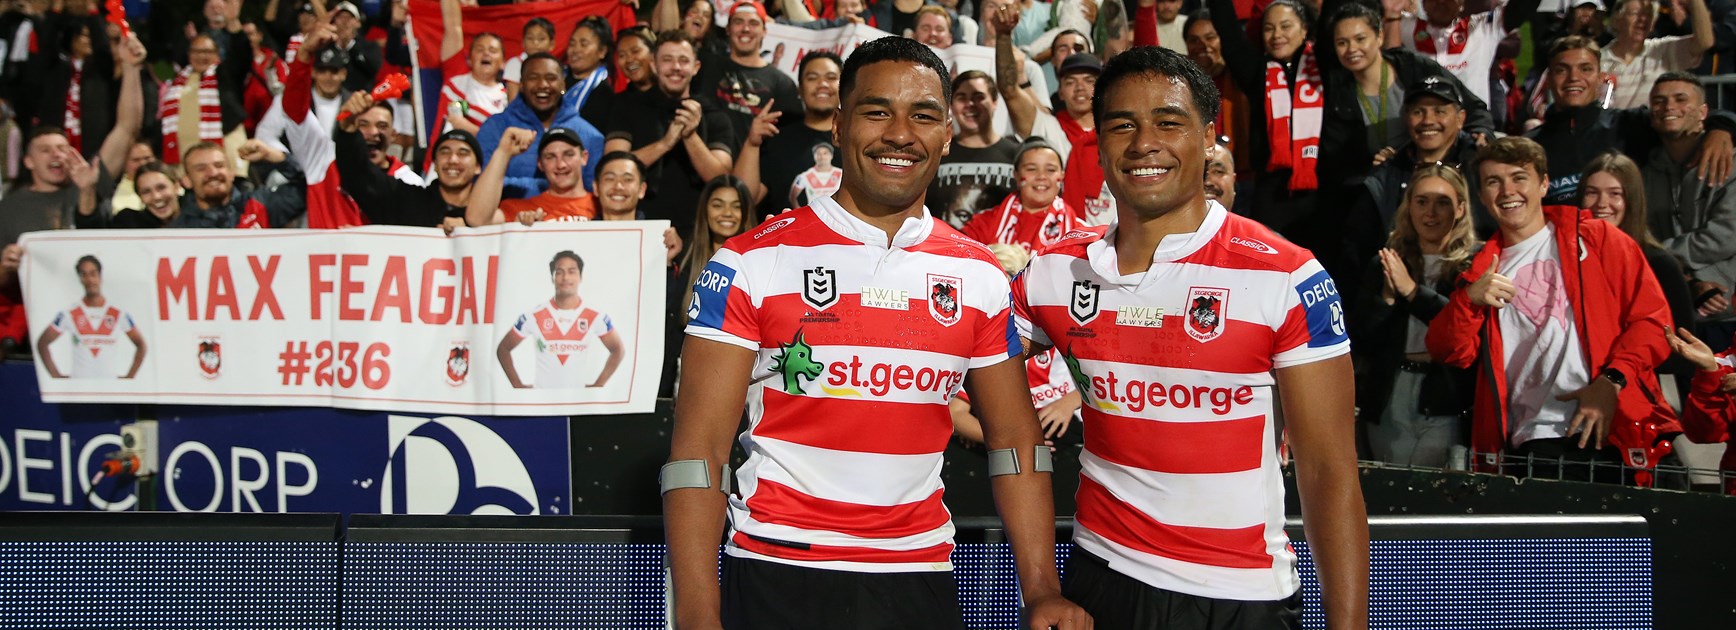 Feagai by my side: Brothers bond set to form lethal left-edge